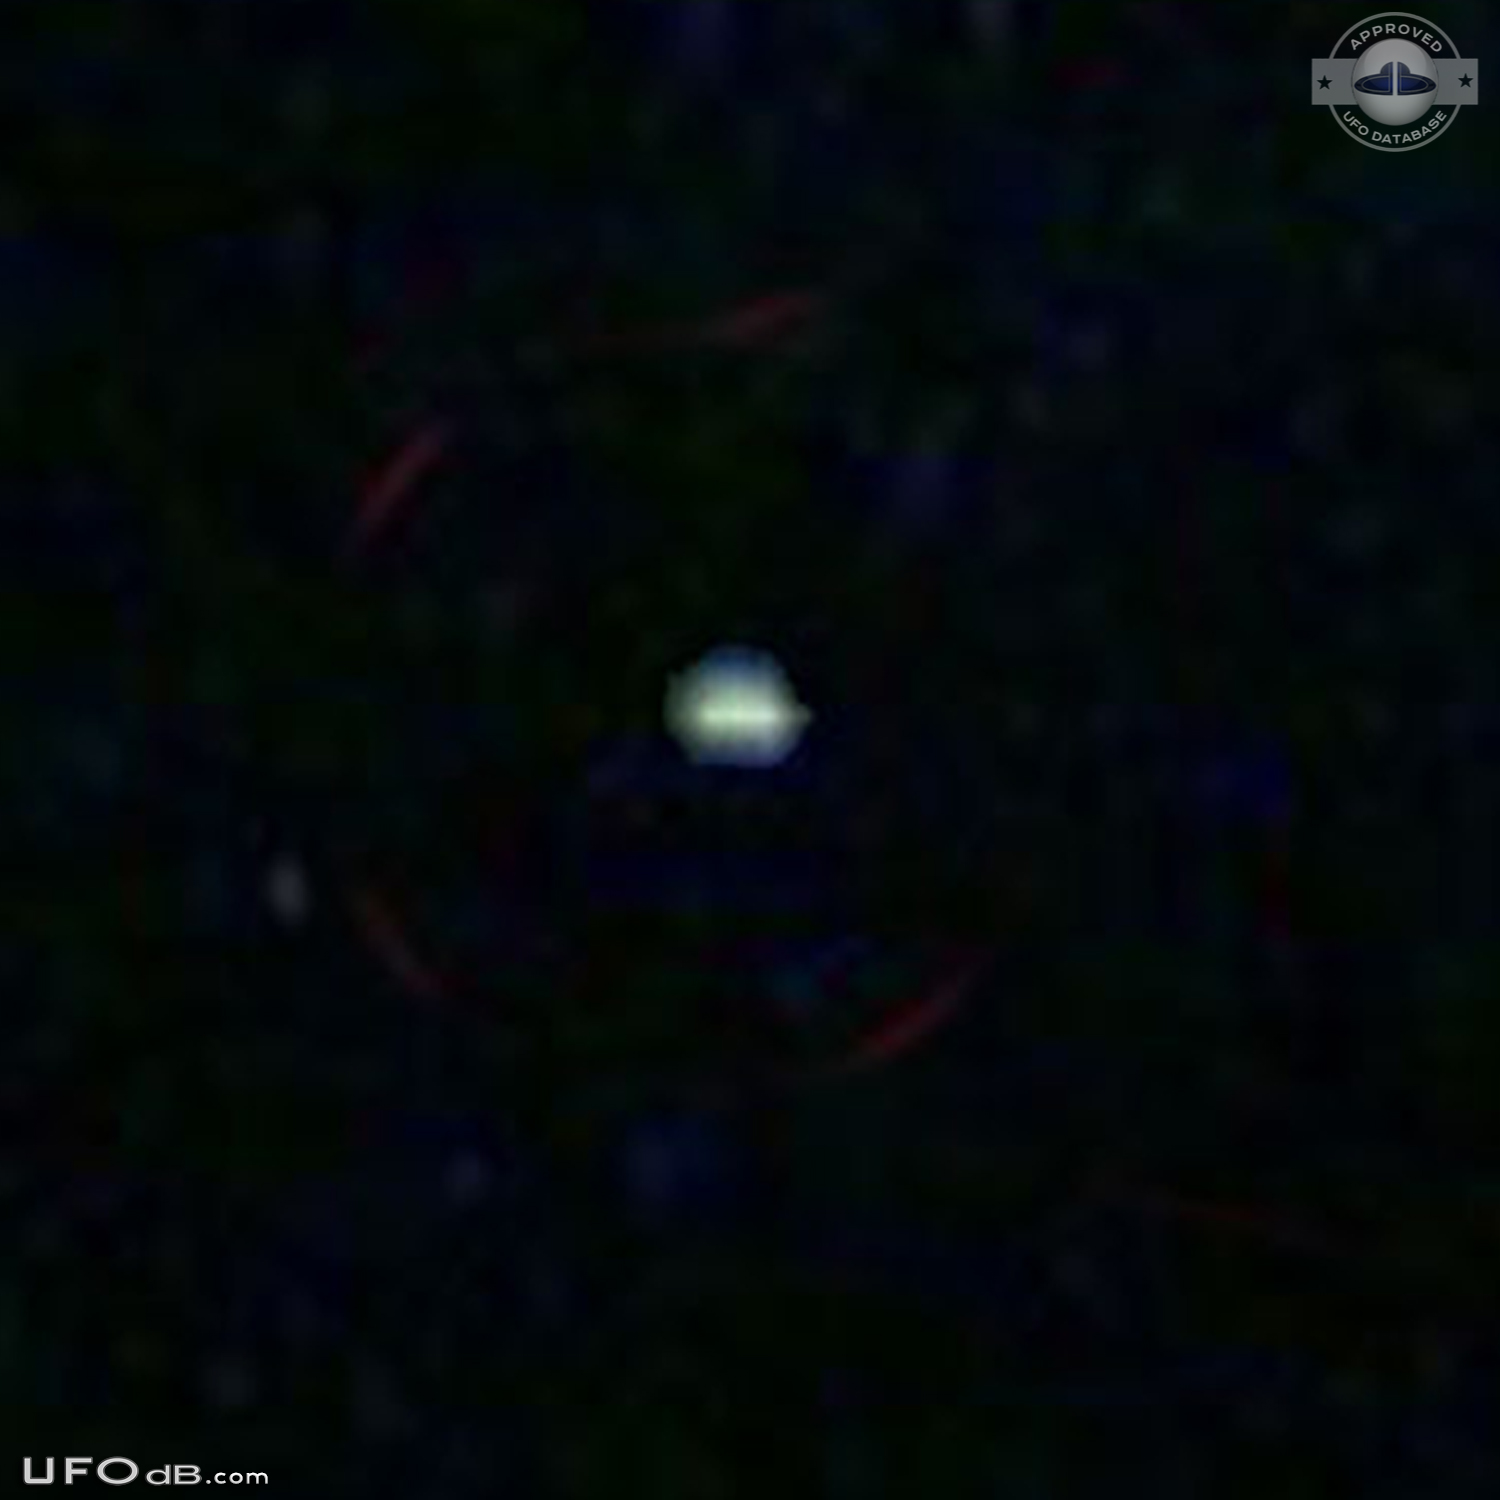 UFO was there for two hours over Barrie Ontario Canada in 2007 UFO Picture #646-3